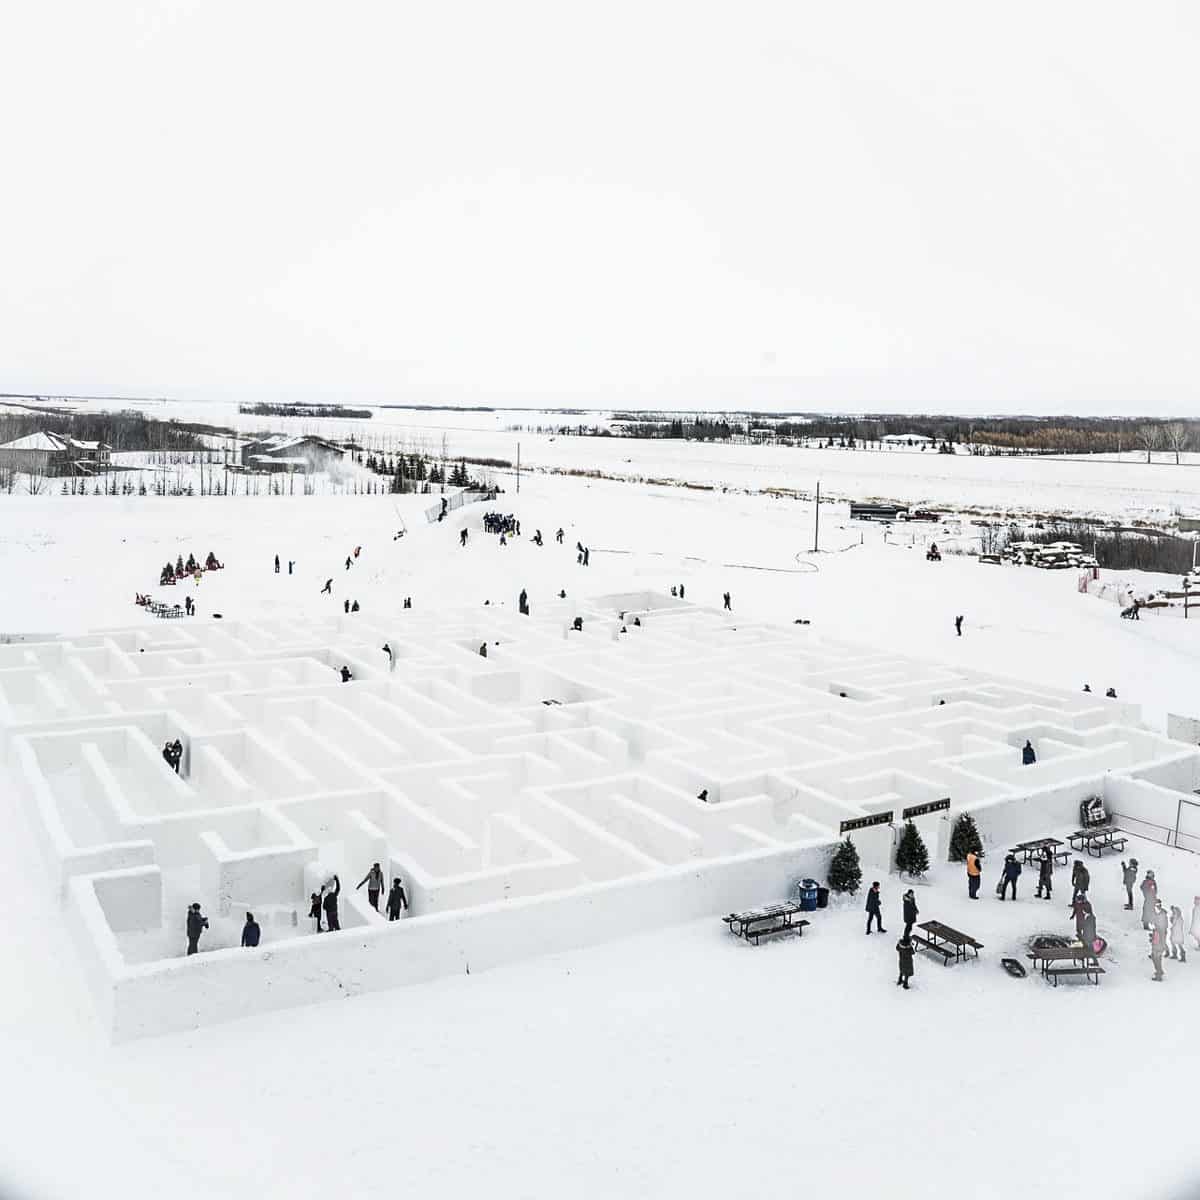 A distant view of a snow maze